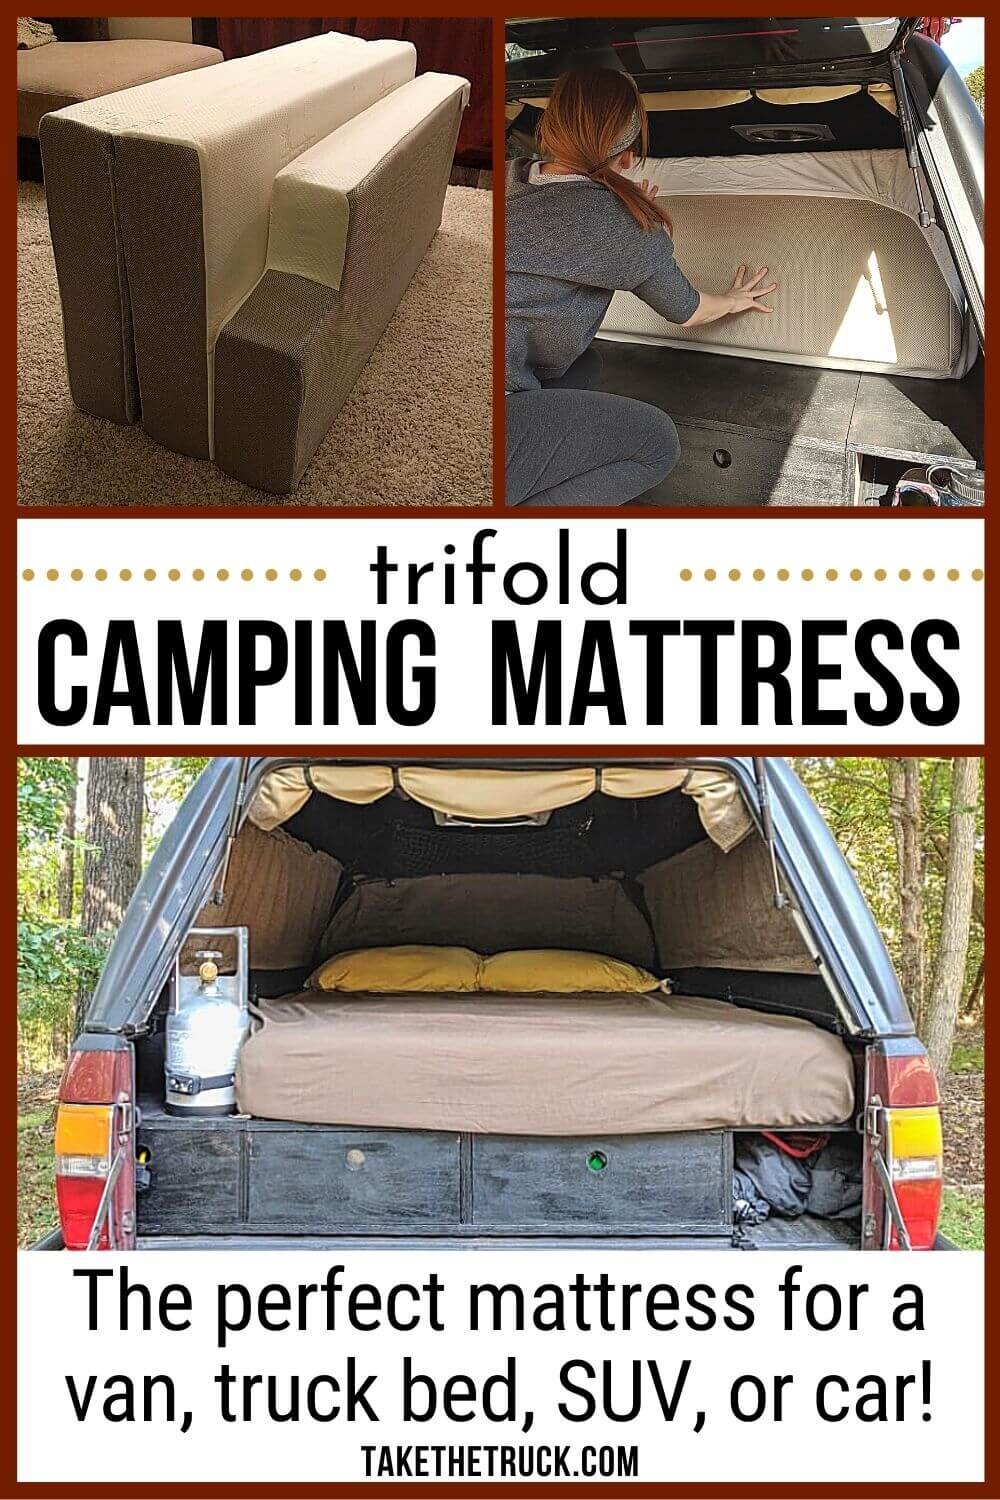 Searching for a truck bed mattress for camping? This tri fold camping mattress is the perfect foam or memory foam mattress for your truck bed, small camper, SUV, car, campervan! 